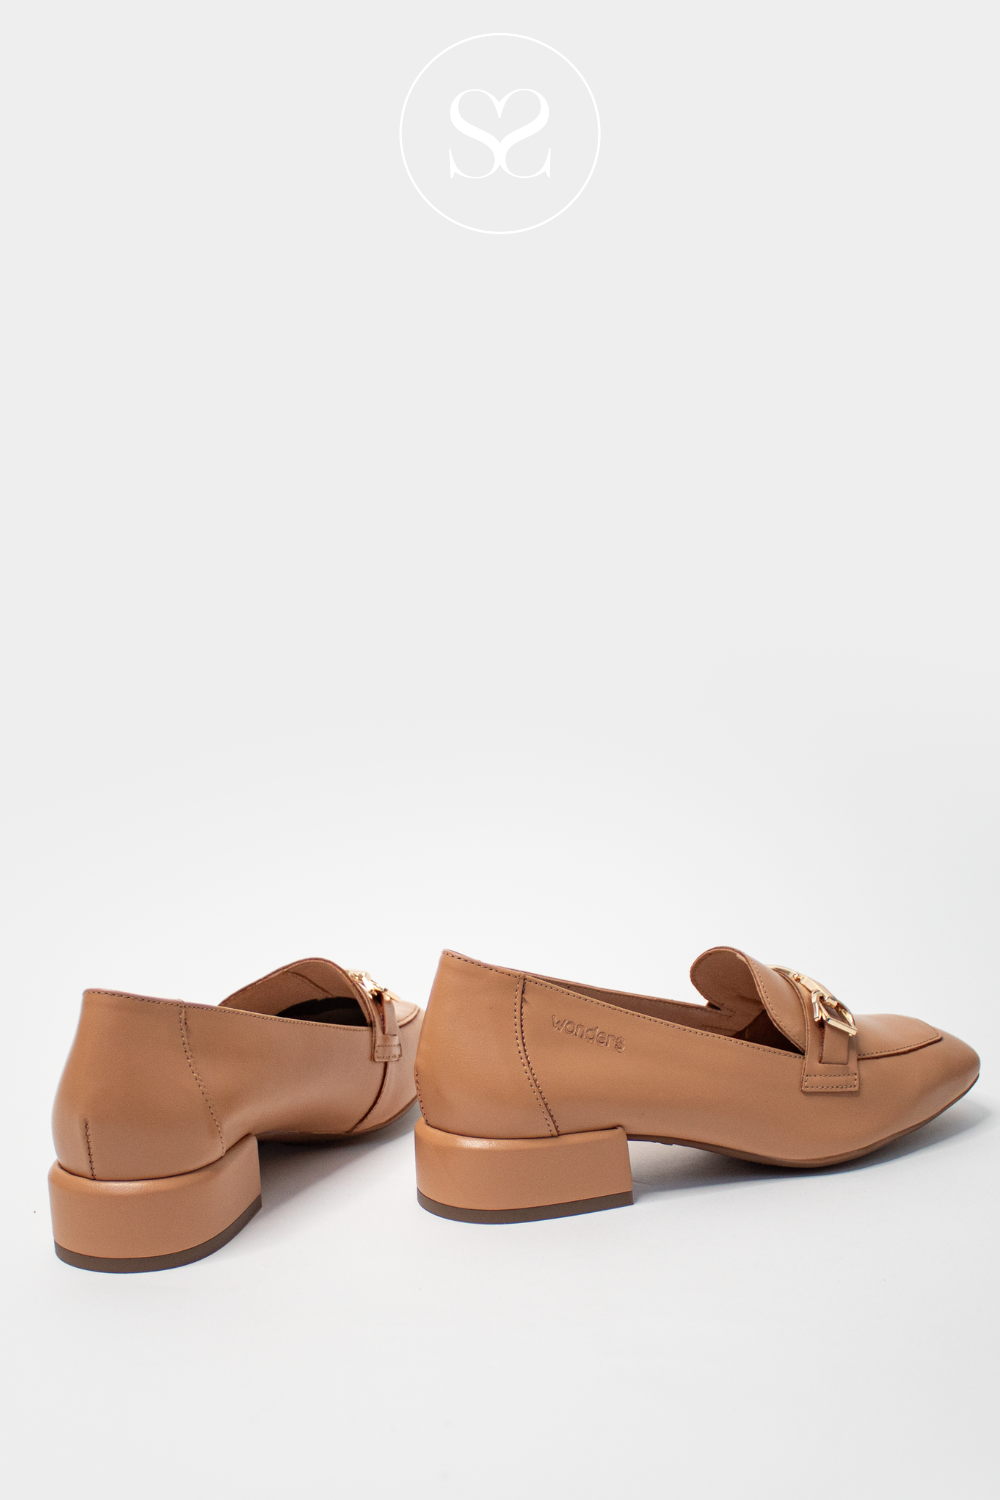 WONDERS C-5030 CAMEL LOW HEELED LOAFERS WITH GOLD BUCKLE